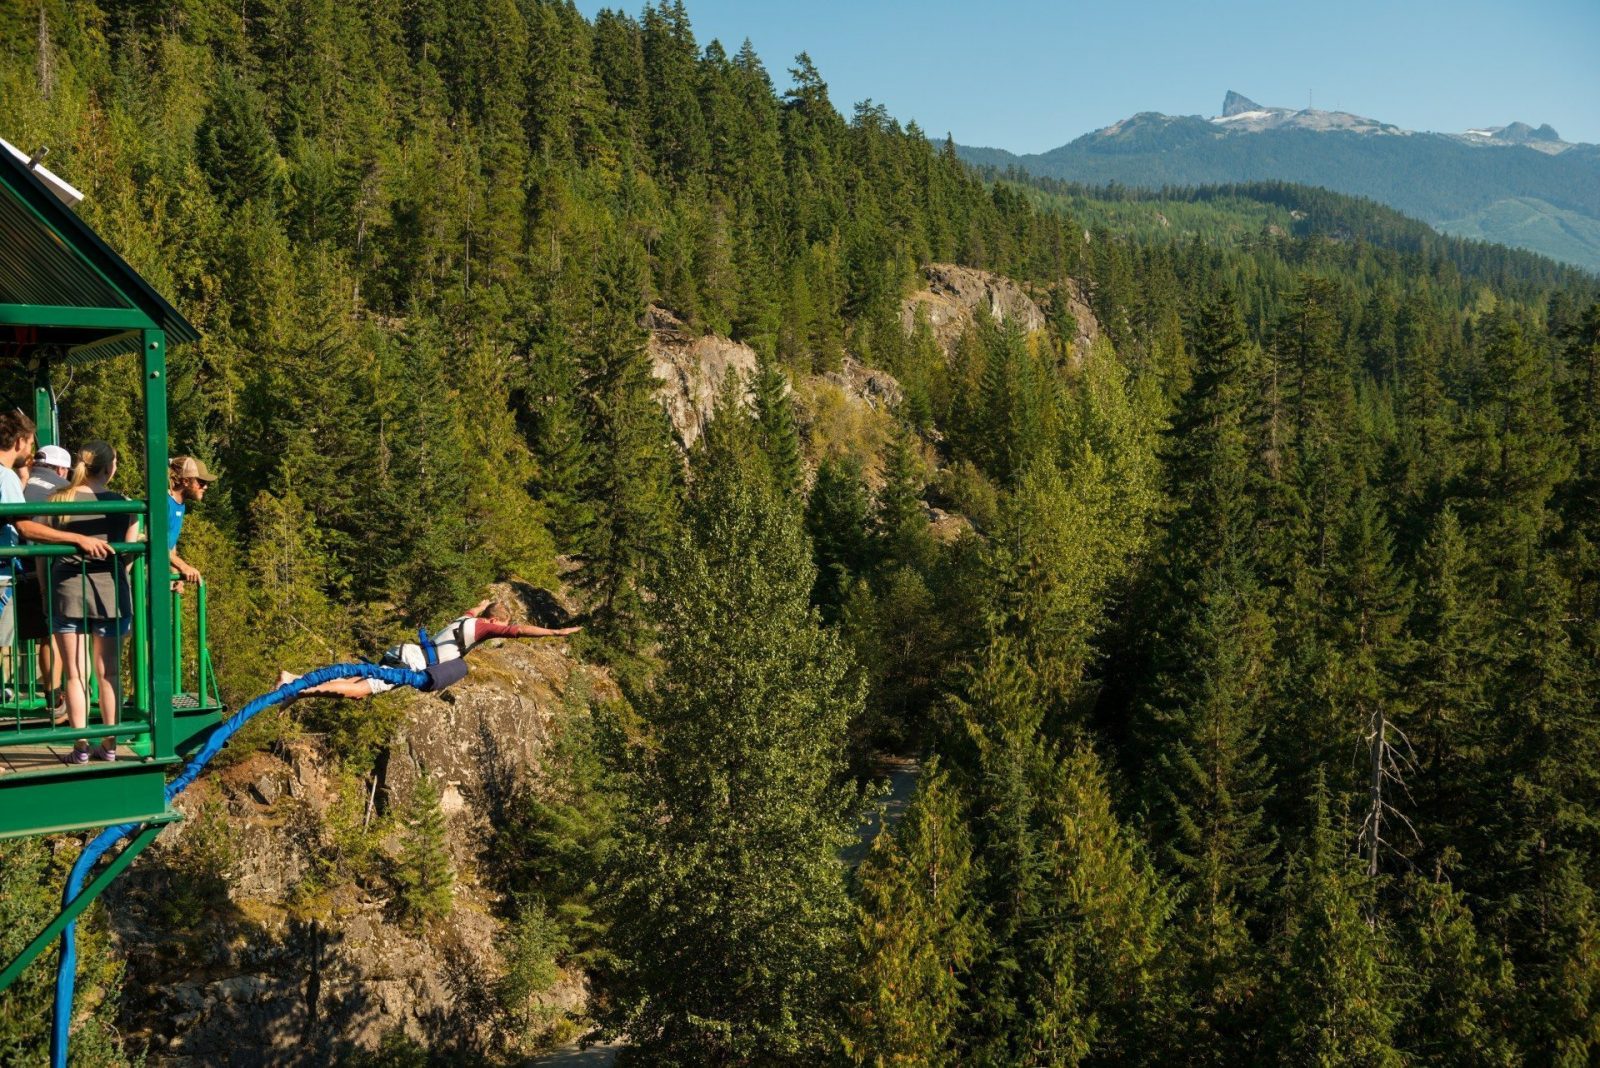 Taking the leap of faith with Whistler Bungee, as captured by Mike Crane, Tourism Whistler.